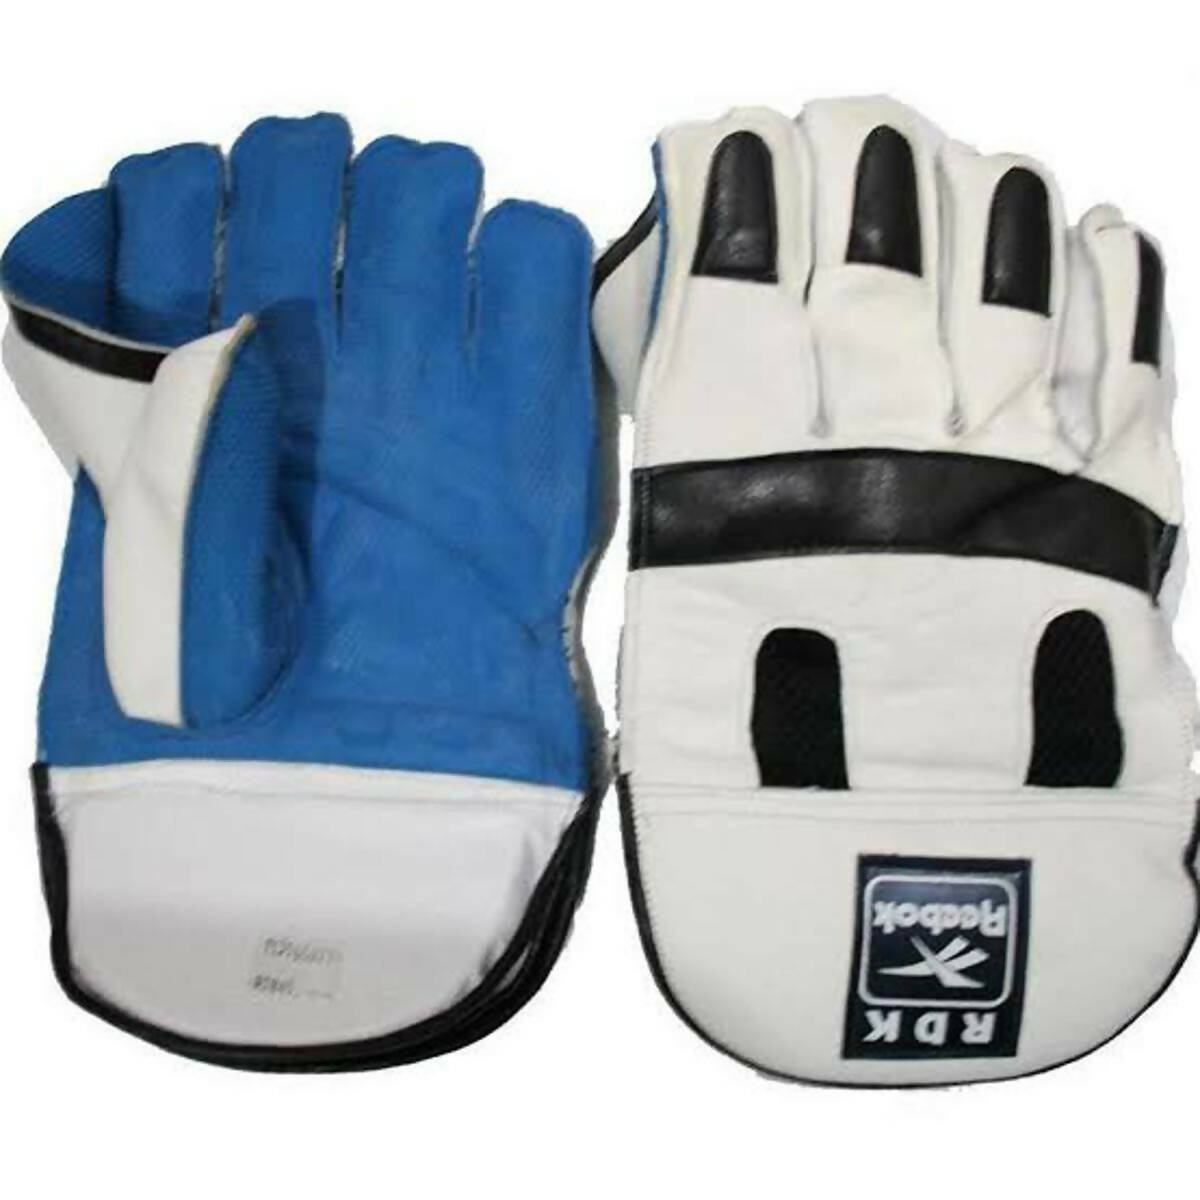 Sports Cricket Gloves Keepers wicket gloves Wicket Keepers Gloves Mens Large New keeping leather Random color